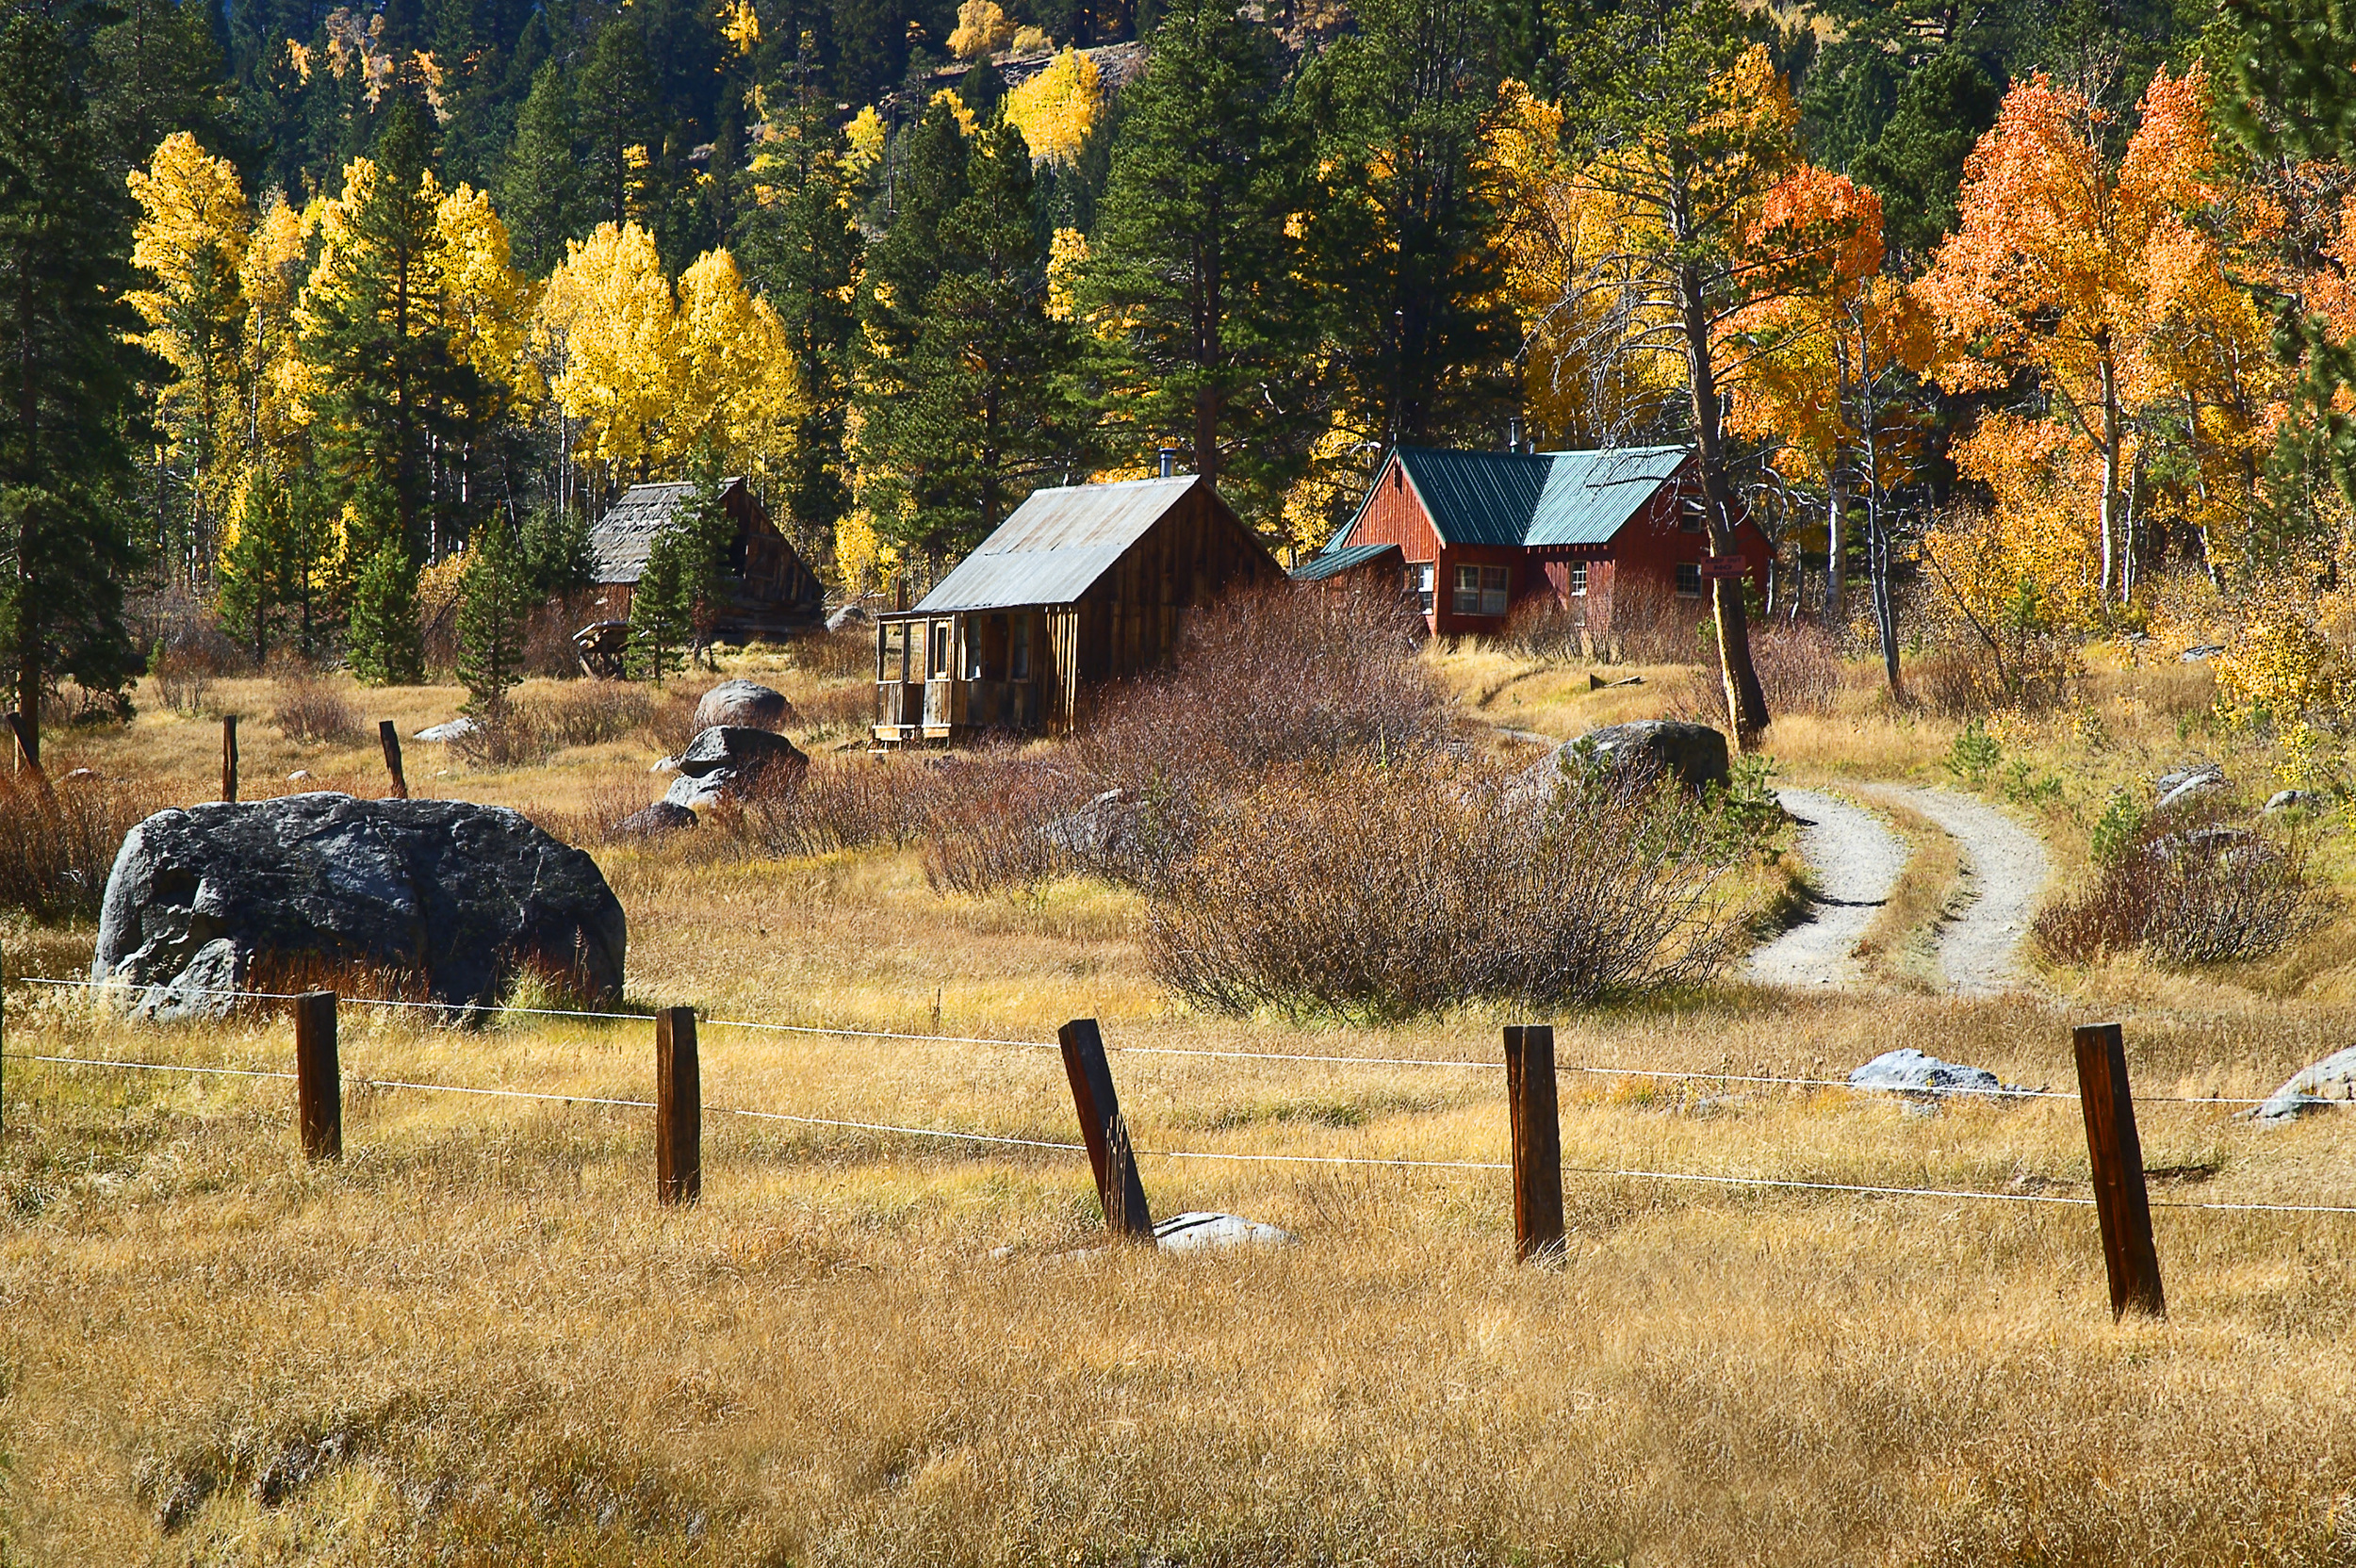 Cabins and Barn, Hwy 88 East of Carson Pass